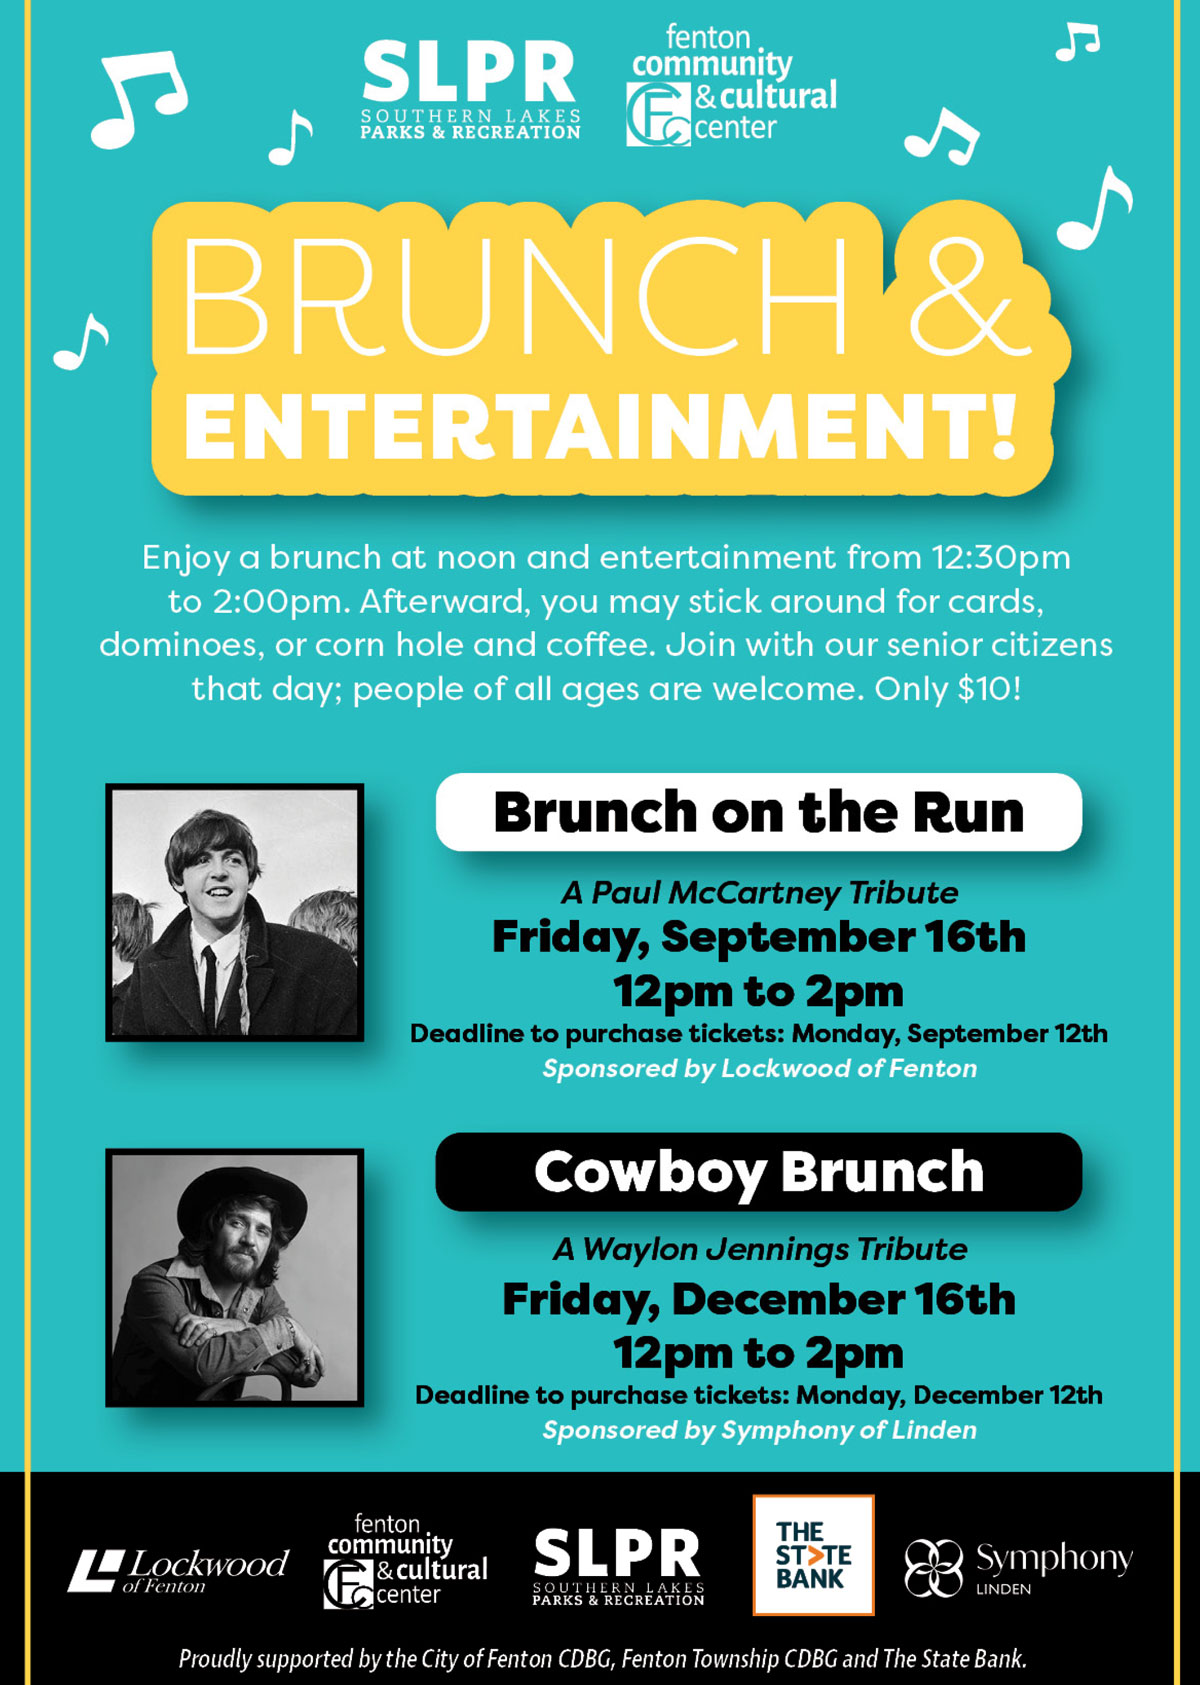 Brunch and Entertainment in Fenton